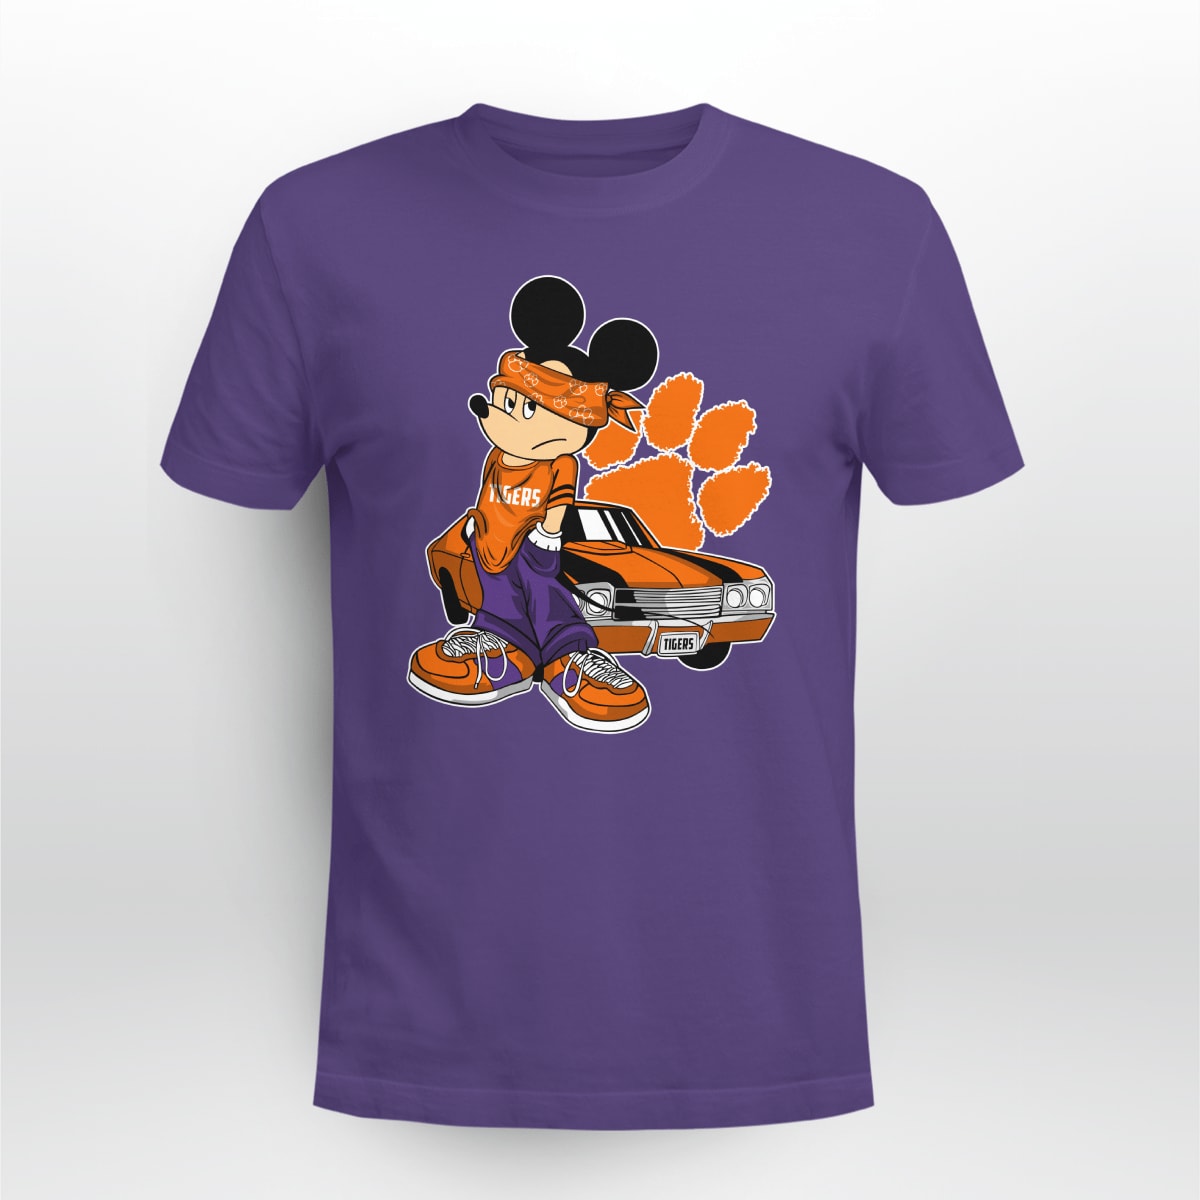 Mickey Mouse Clemson Tigers Super Cool Mickey Mouse 100 Year Anniversary Shirt Keqwya.jpg